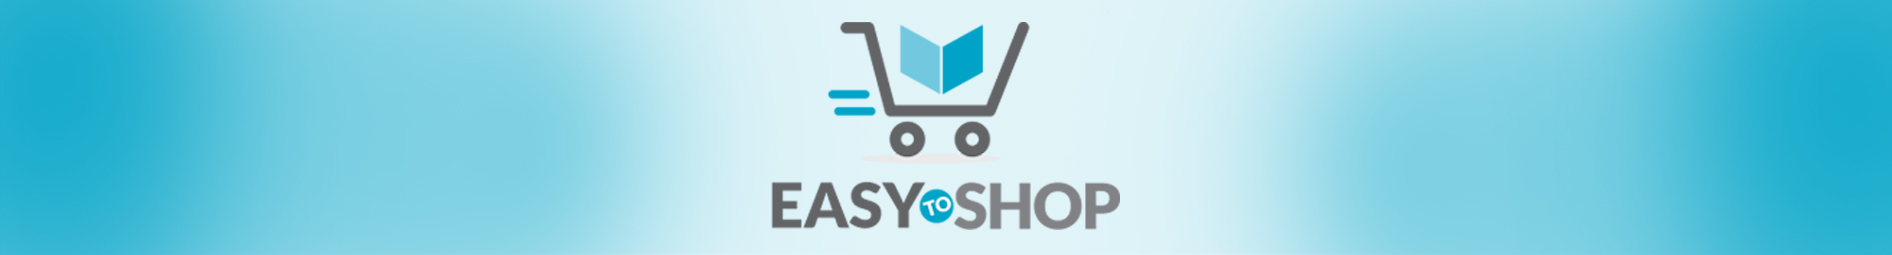 BANNER-EASY-TO-SHOP3